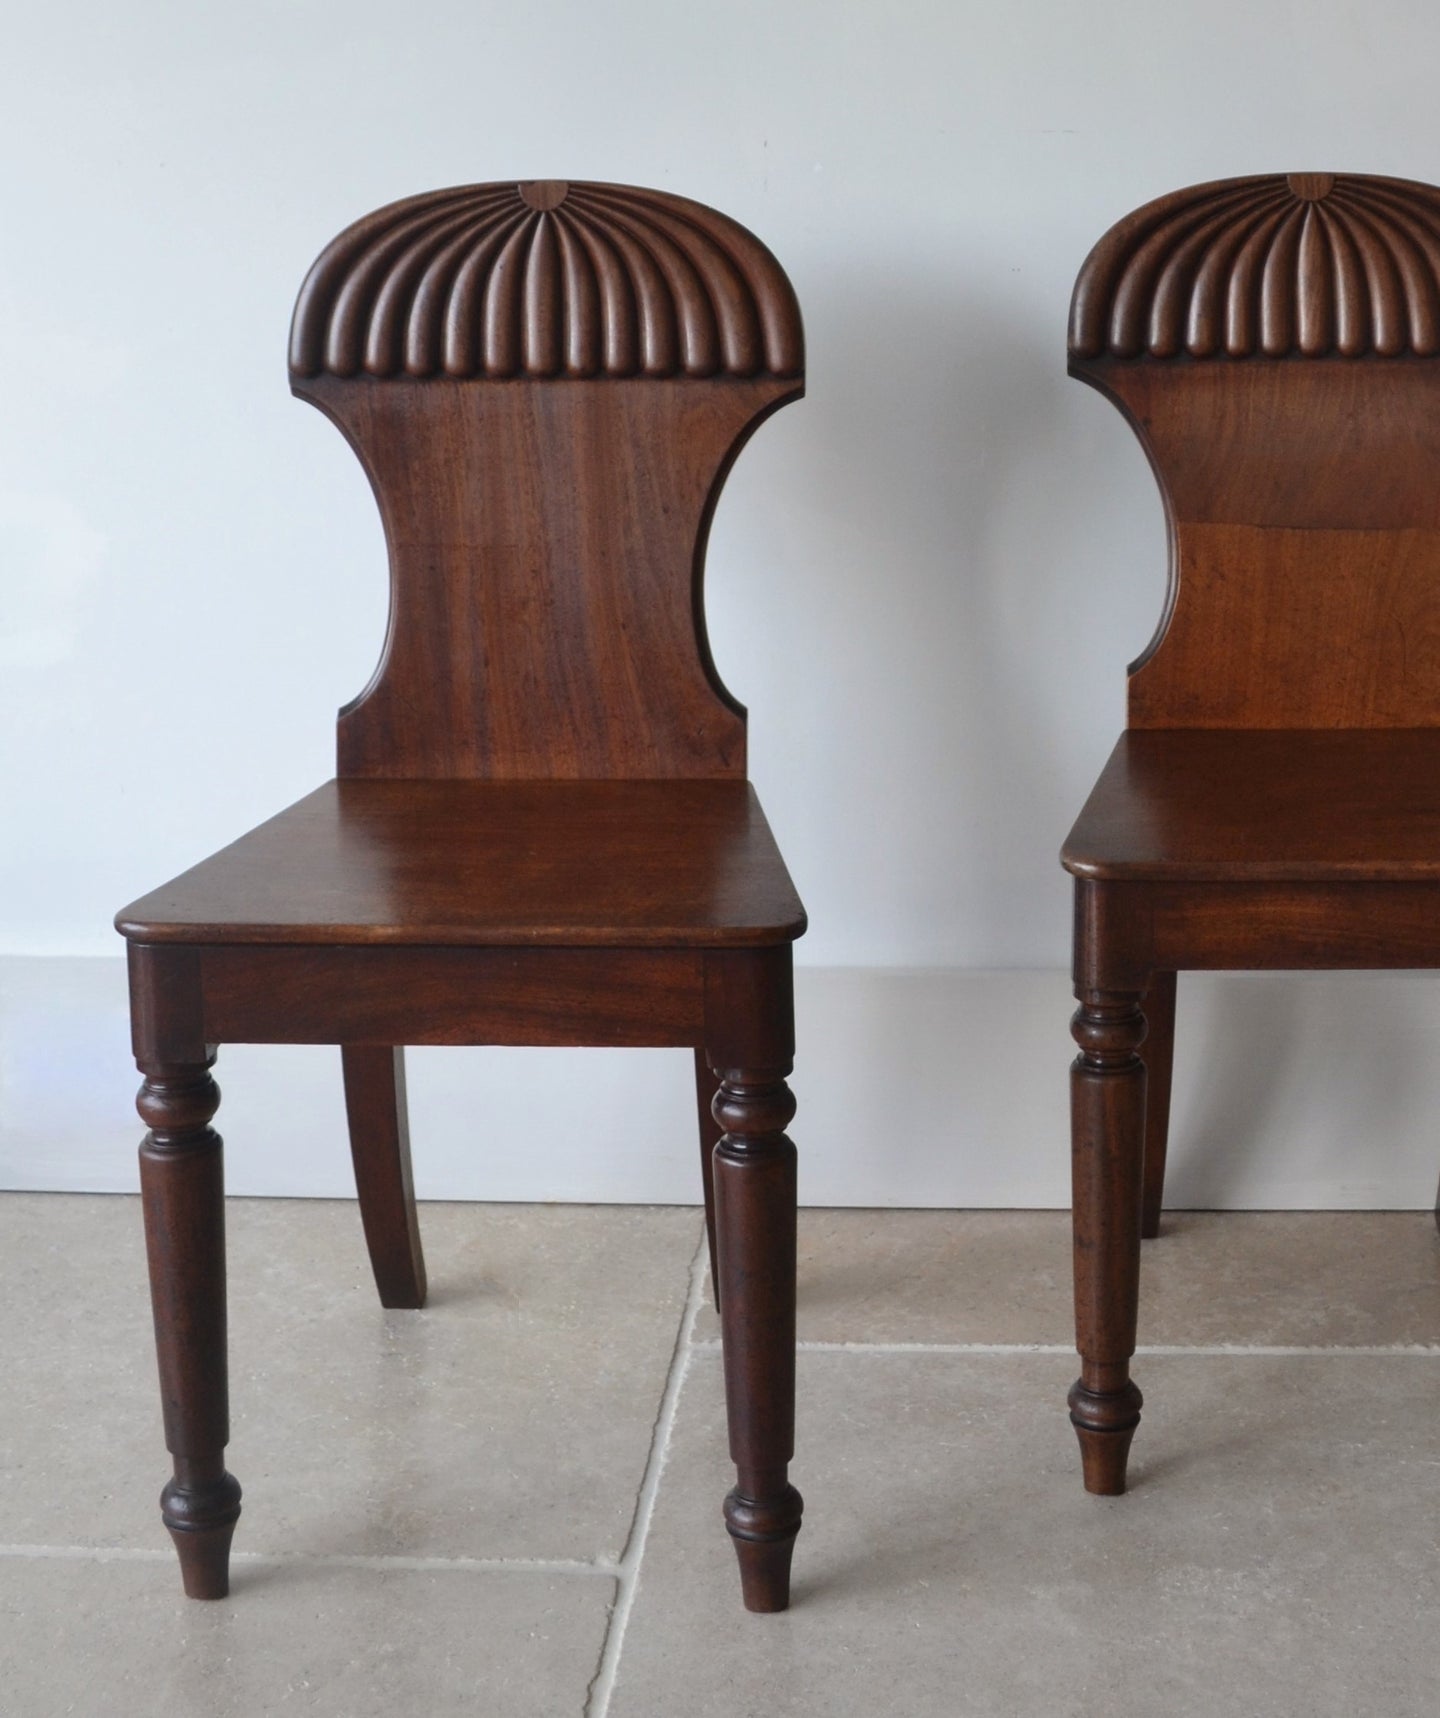 A Pair of 19th Century - Gillows Hall Chairs